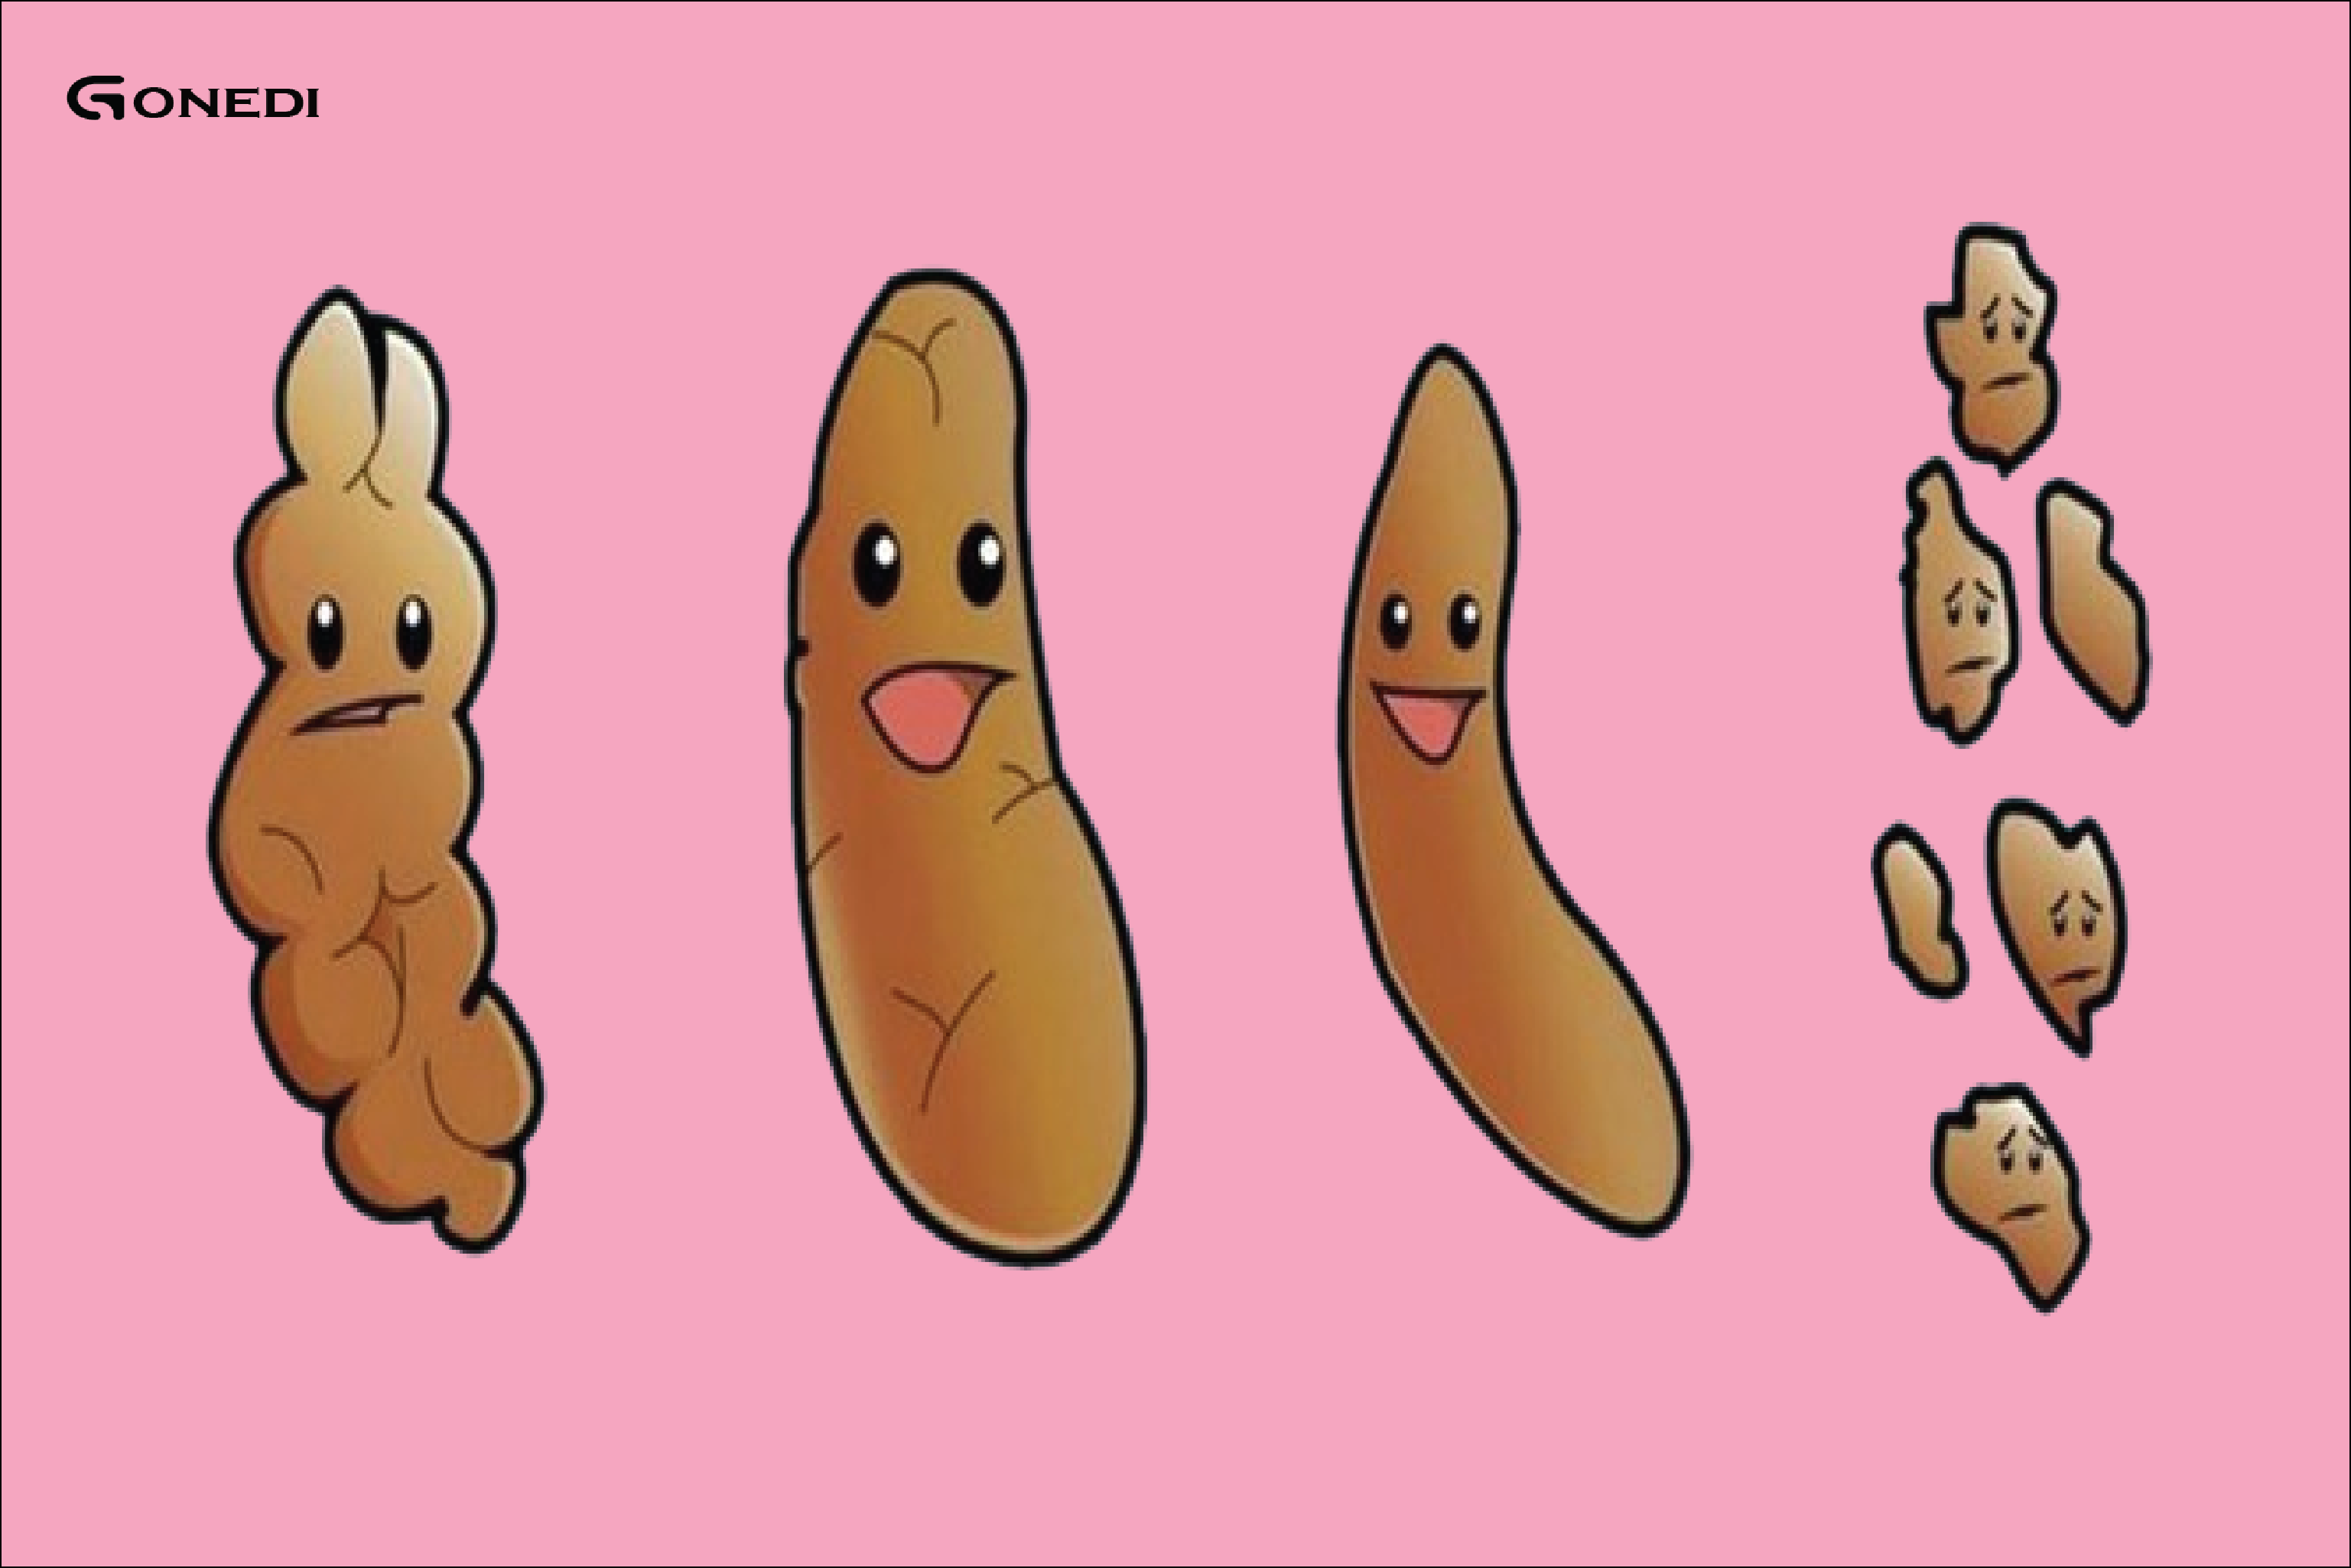 7 things your poop says about you